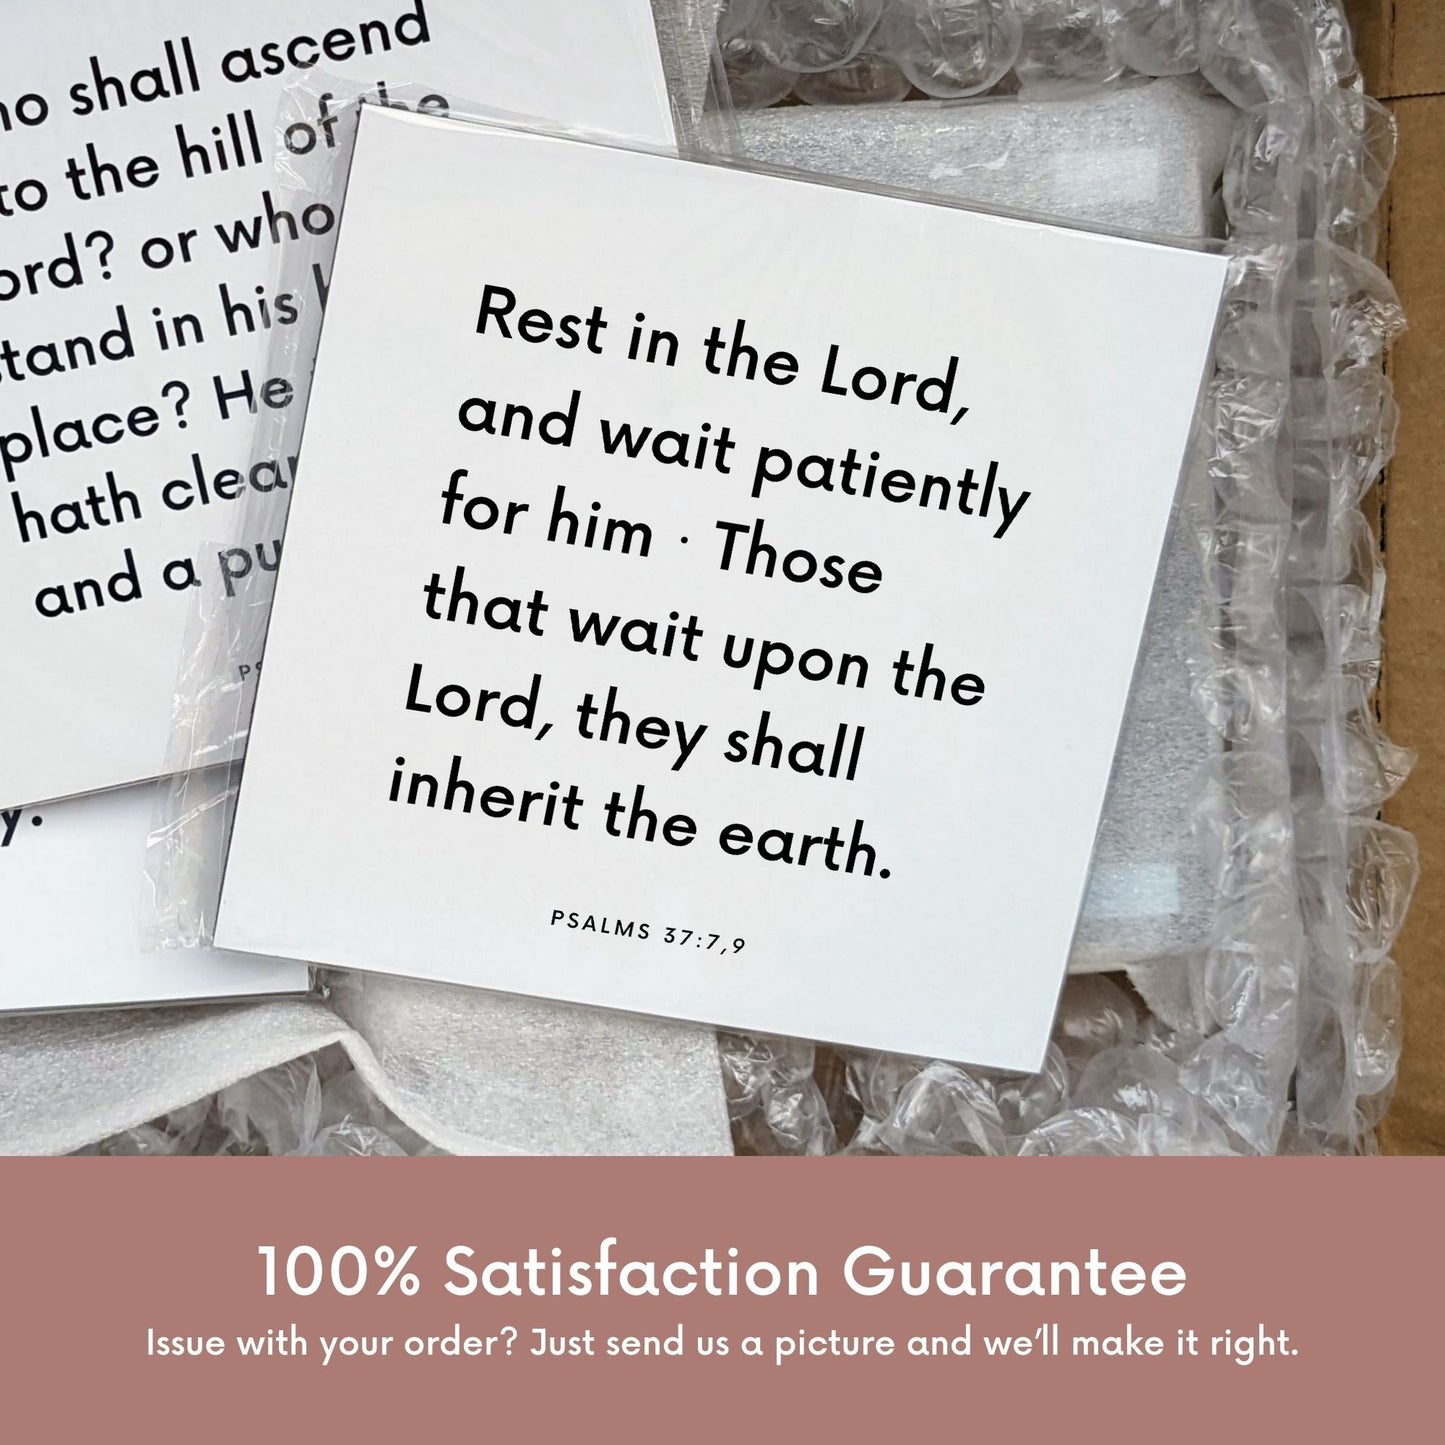 Shipping materials for scripture tile of Psalms 37:7,9 - "Rest in the Lord, and wait patiently for him"